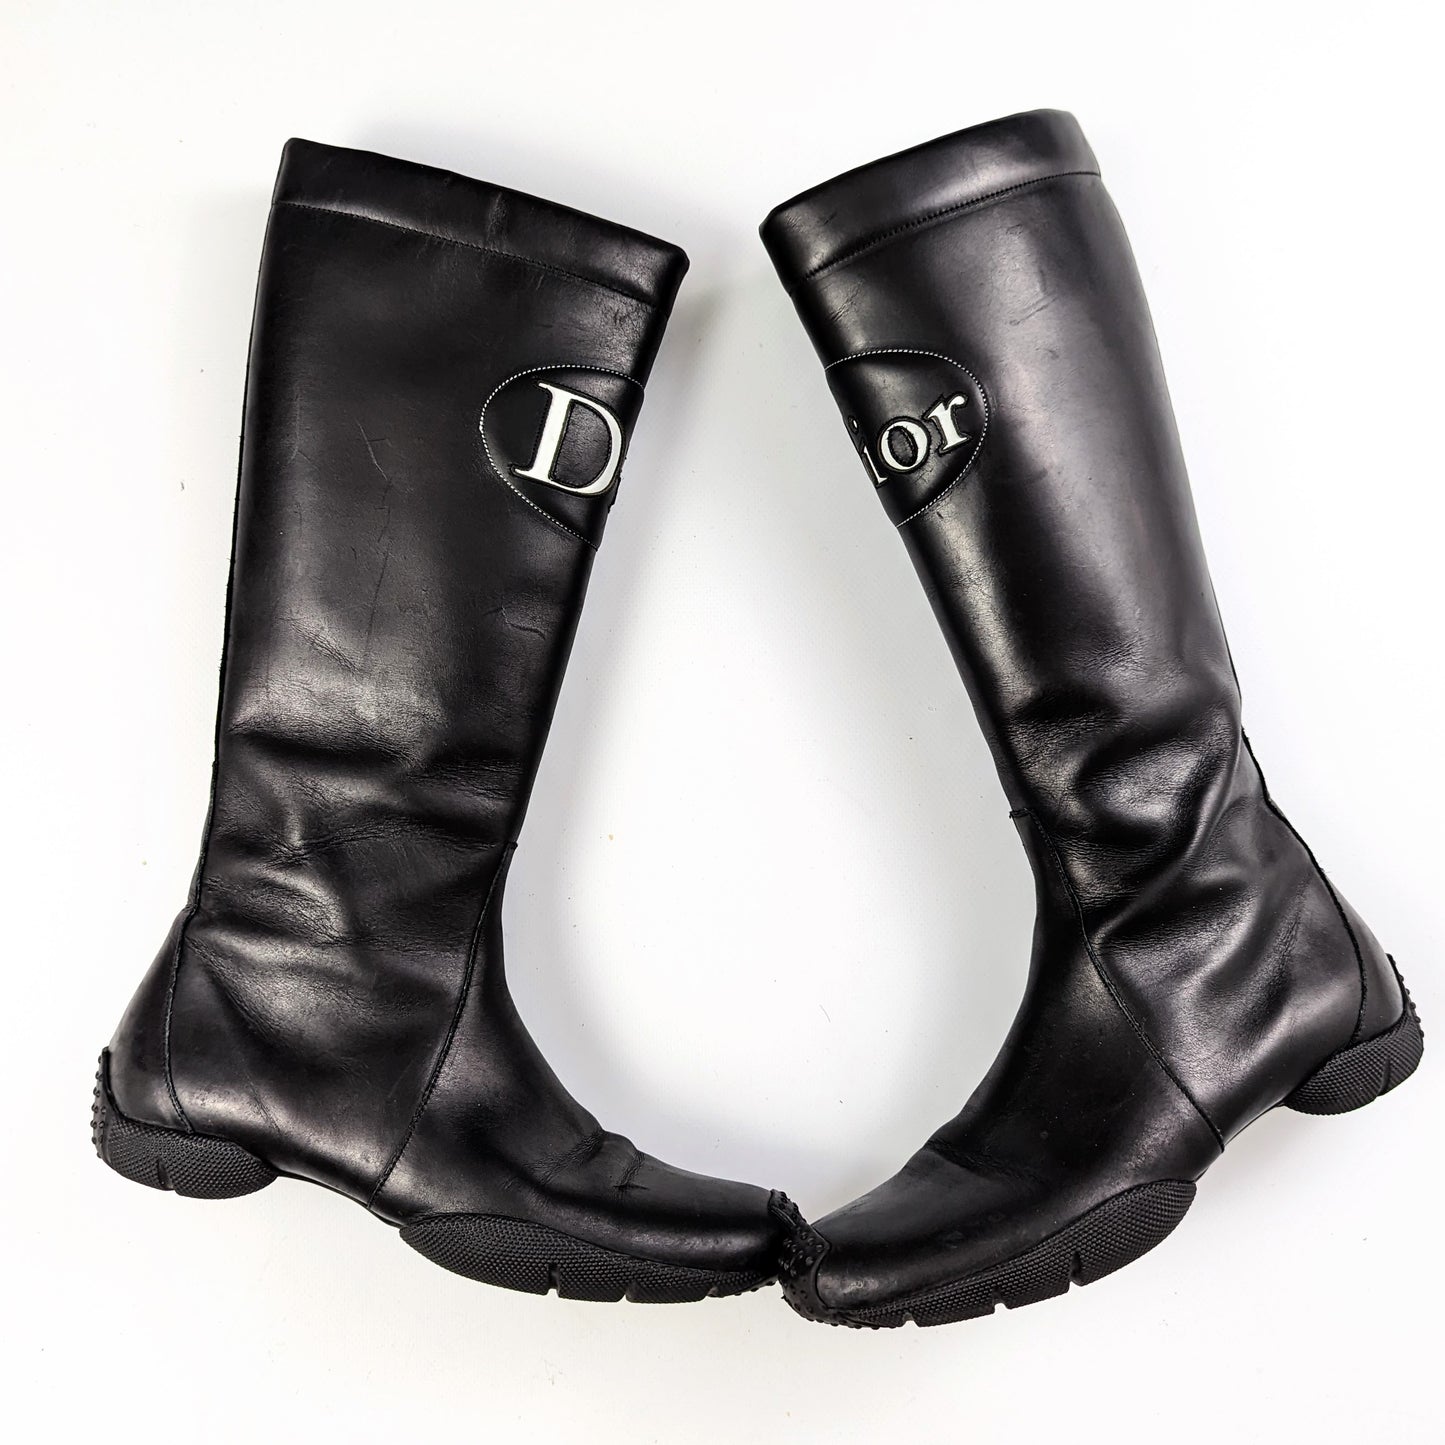 Dior sports leather boots - T38